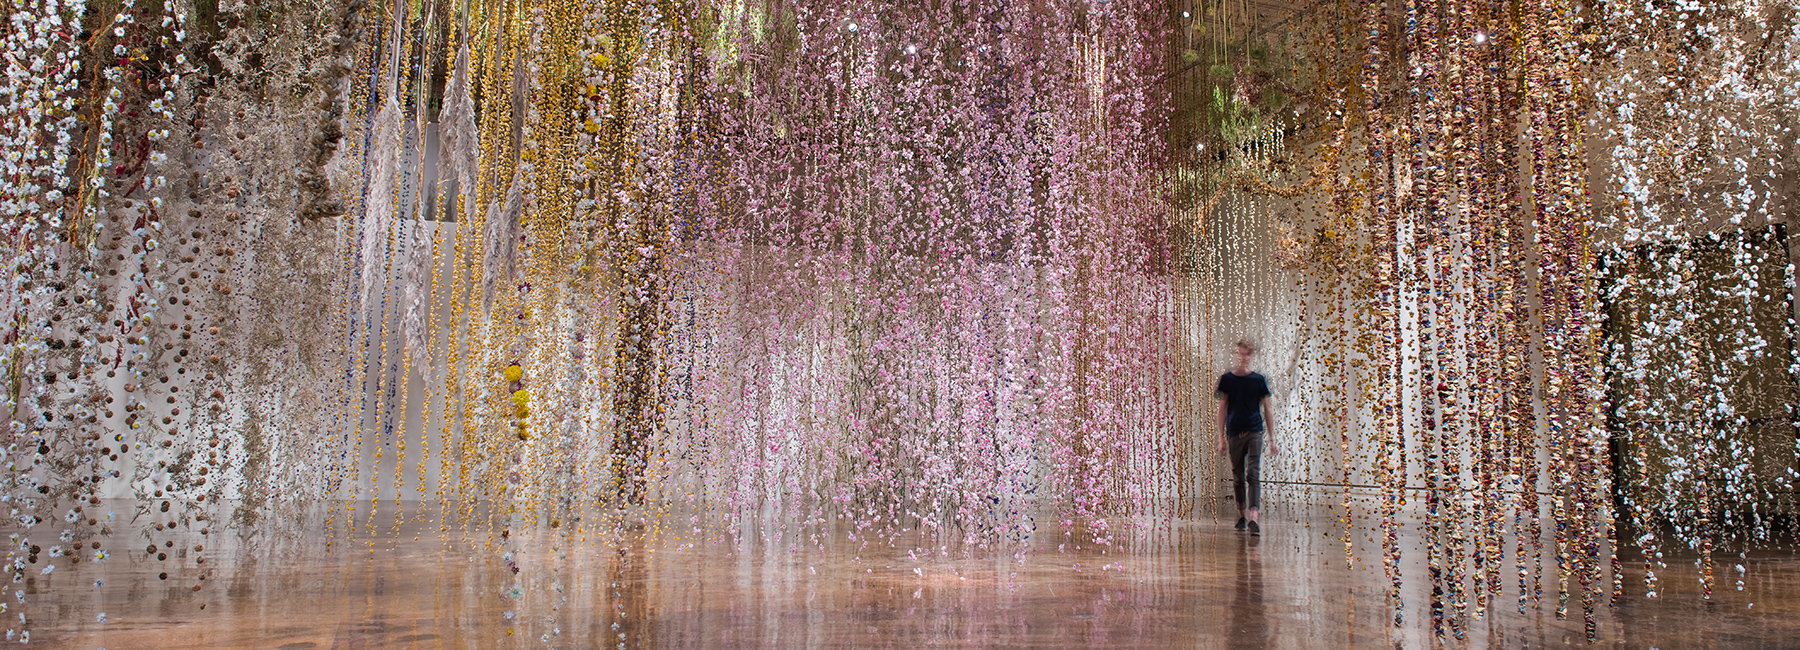 rebecca louise law presents an ethereal inverted garden installation